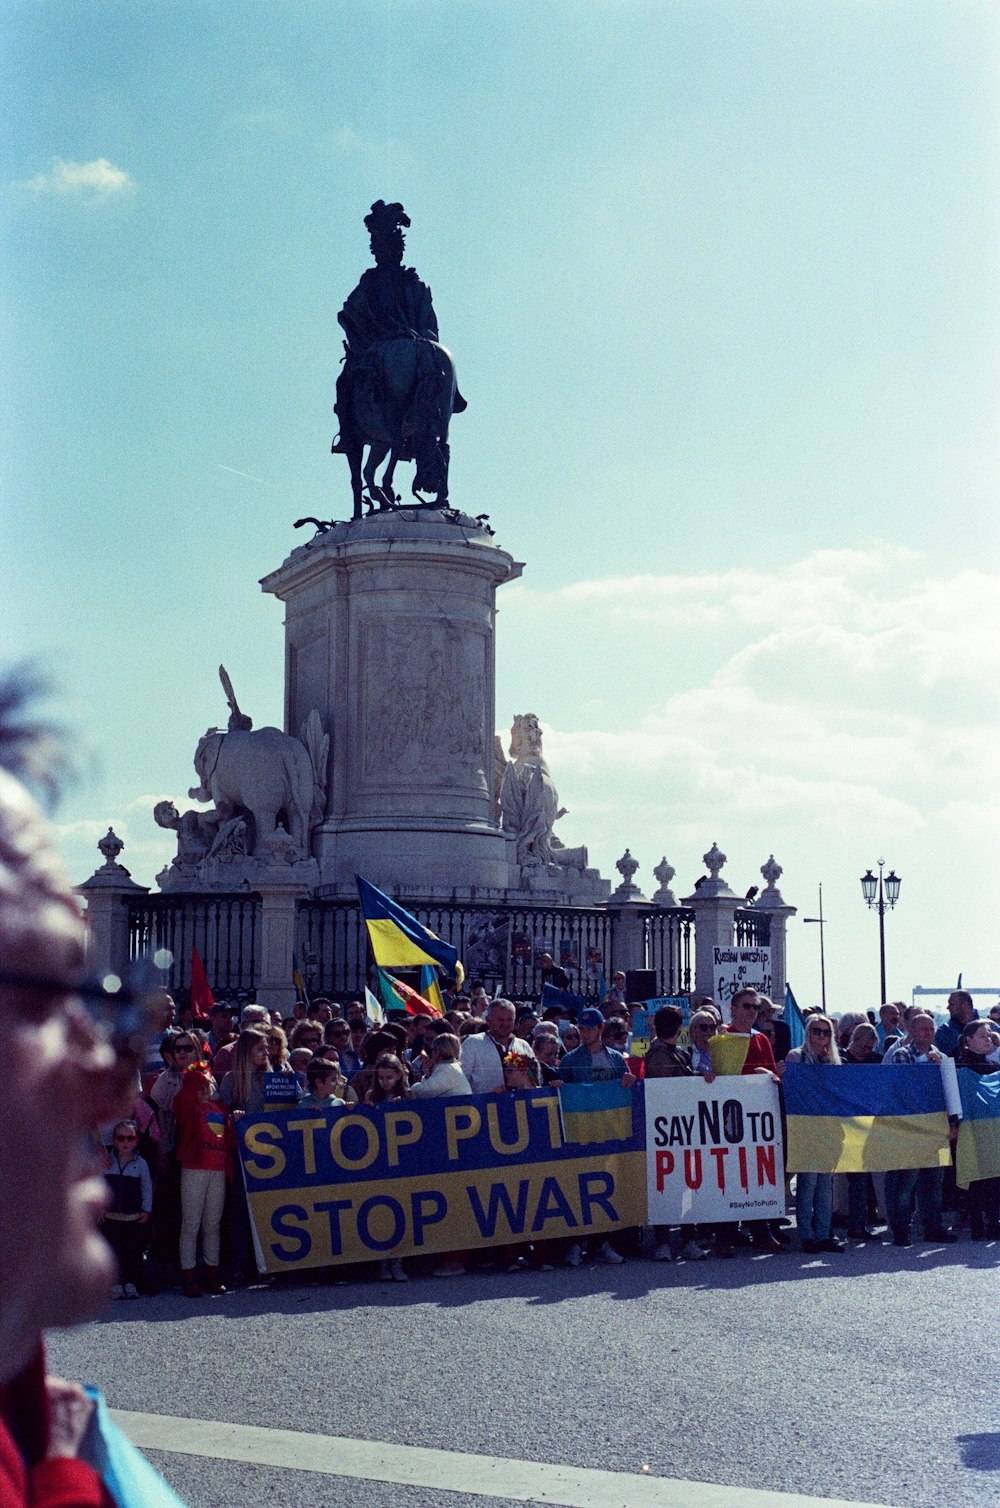 a group of people holding a sign in front of a statue